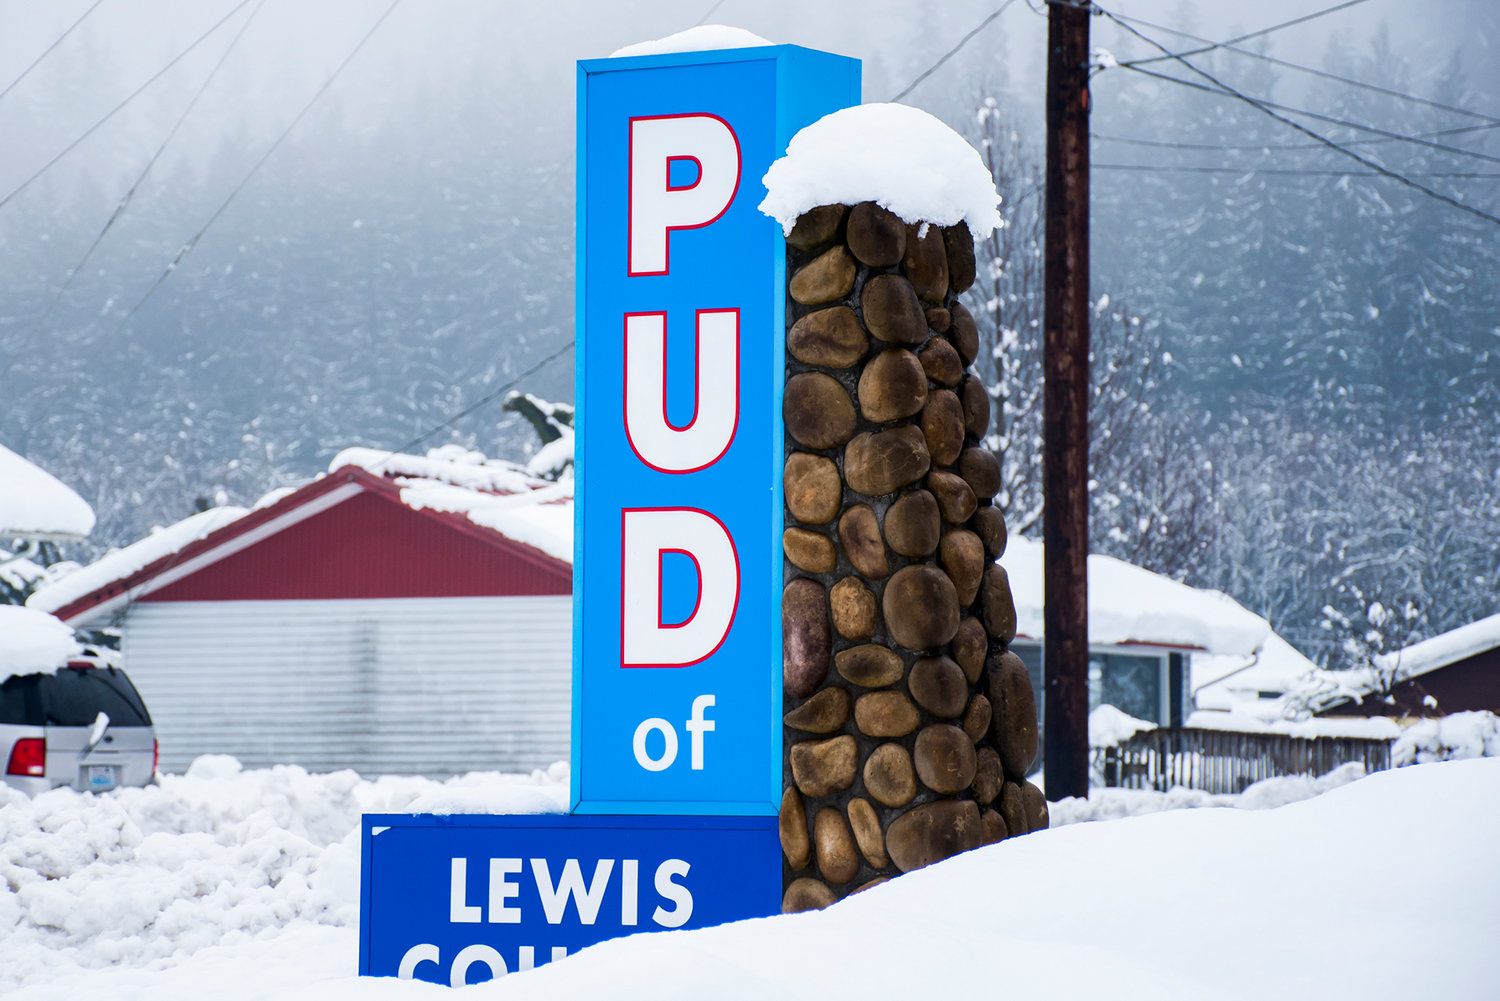 The Lewis County PUD sign in Morton.